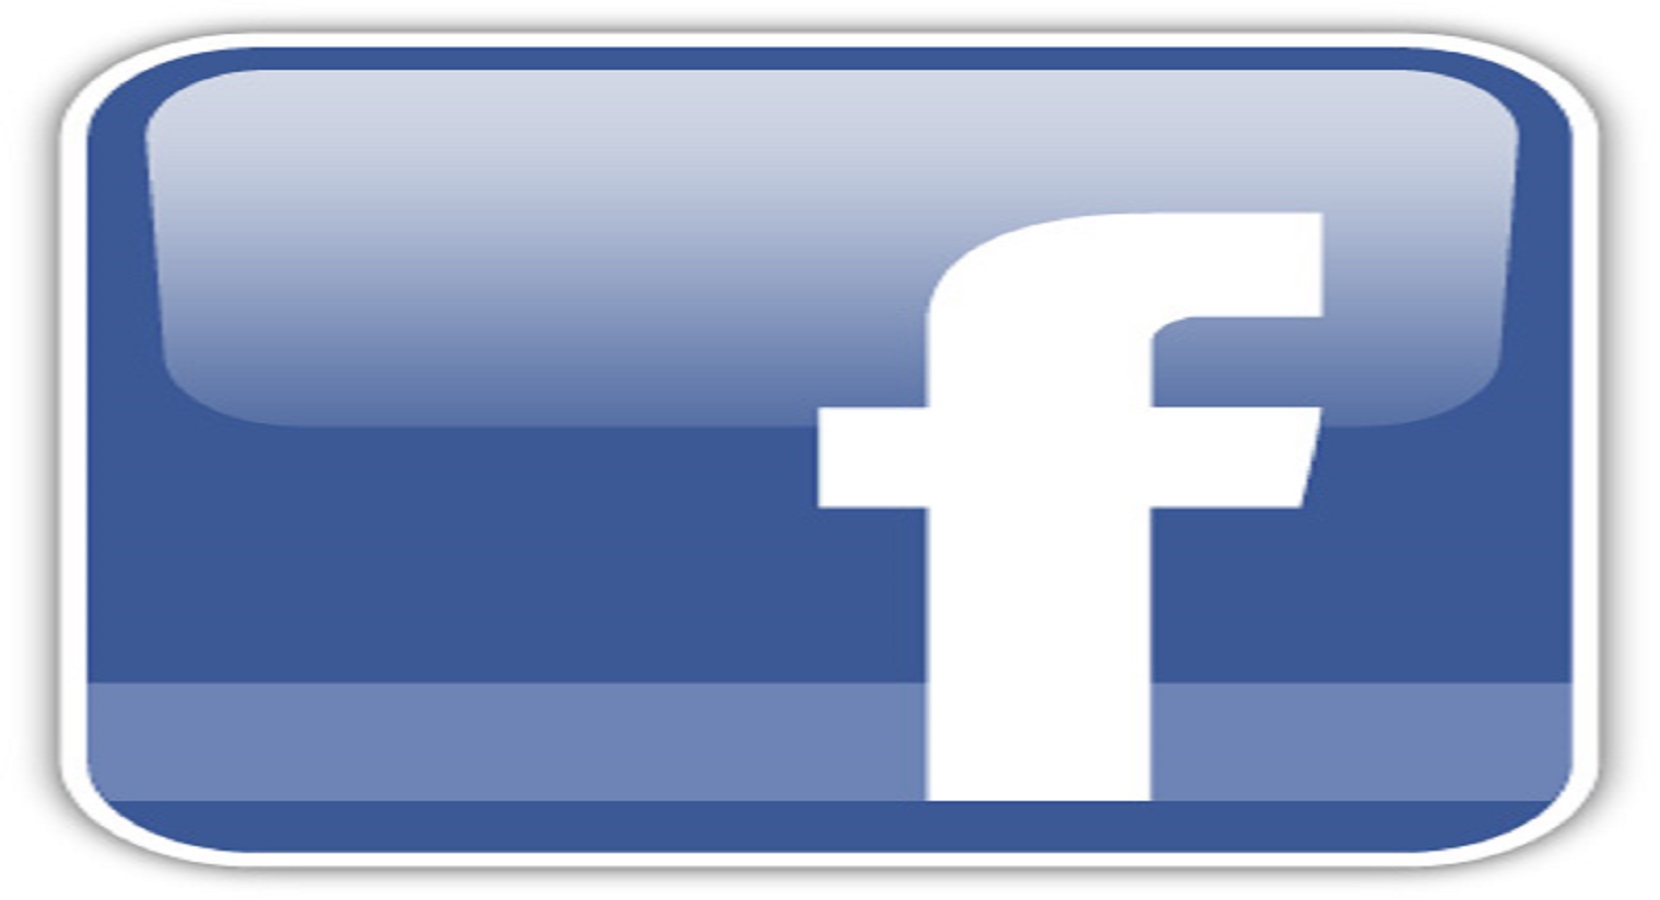 ... service that can boost up the traffic on my facebook page to increase